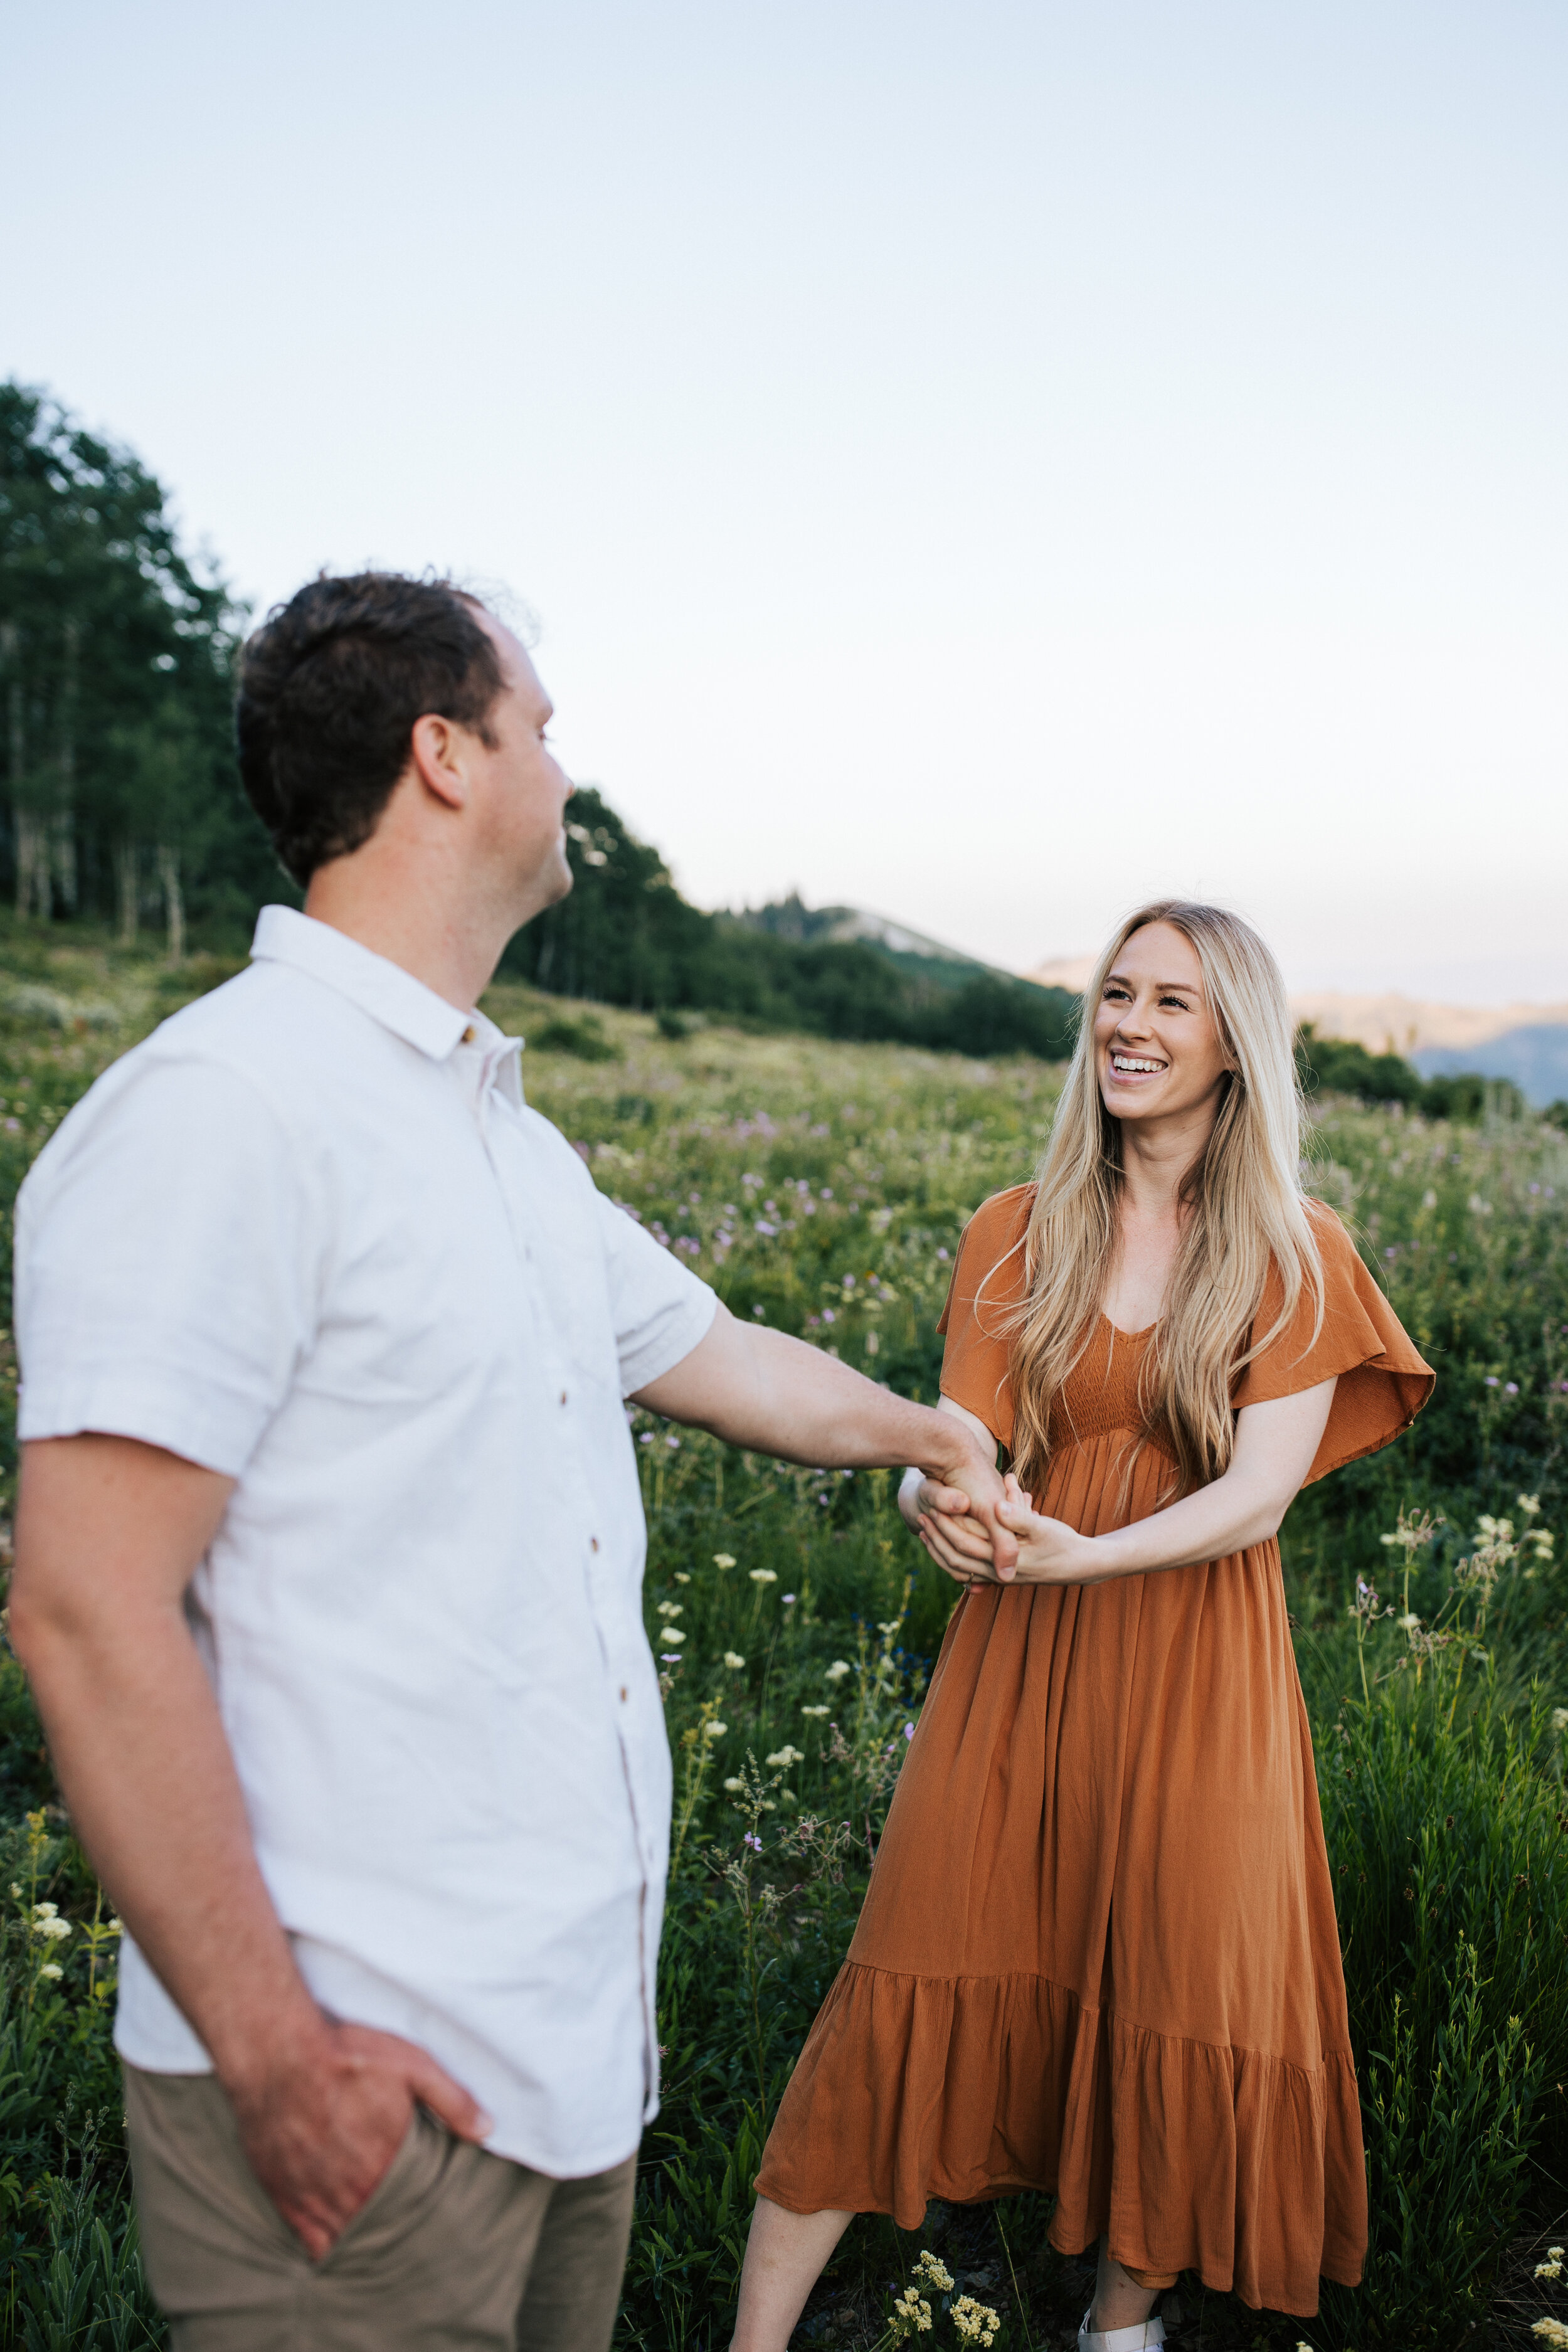  Engagement session in wildflowers in the mountains near Park City, Utah. Summertime engagement photos with mountain views. Engaged couple doing a piggyback ride in the mountains. Outfit inspo. Engagement outfits. #engagementphotos #engagements #wedd